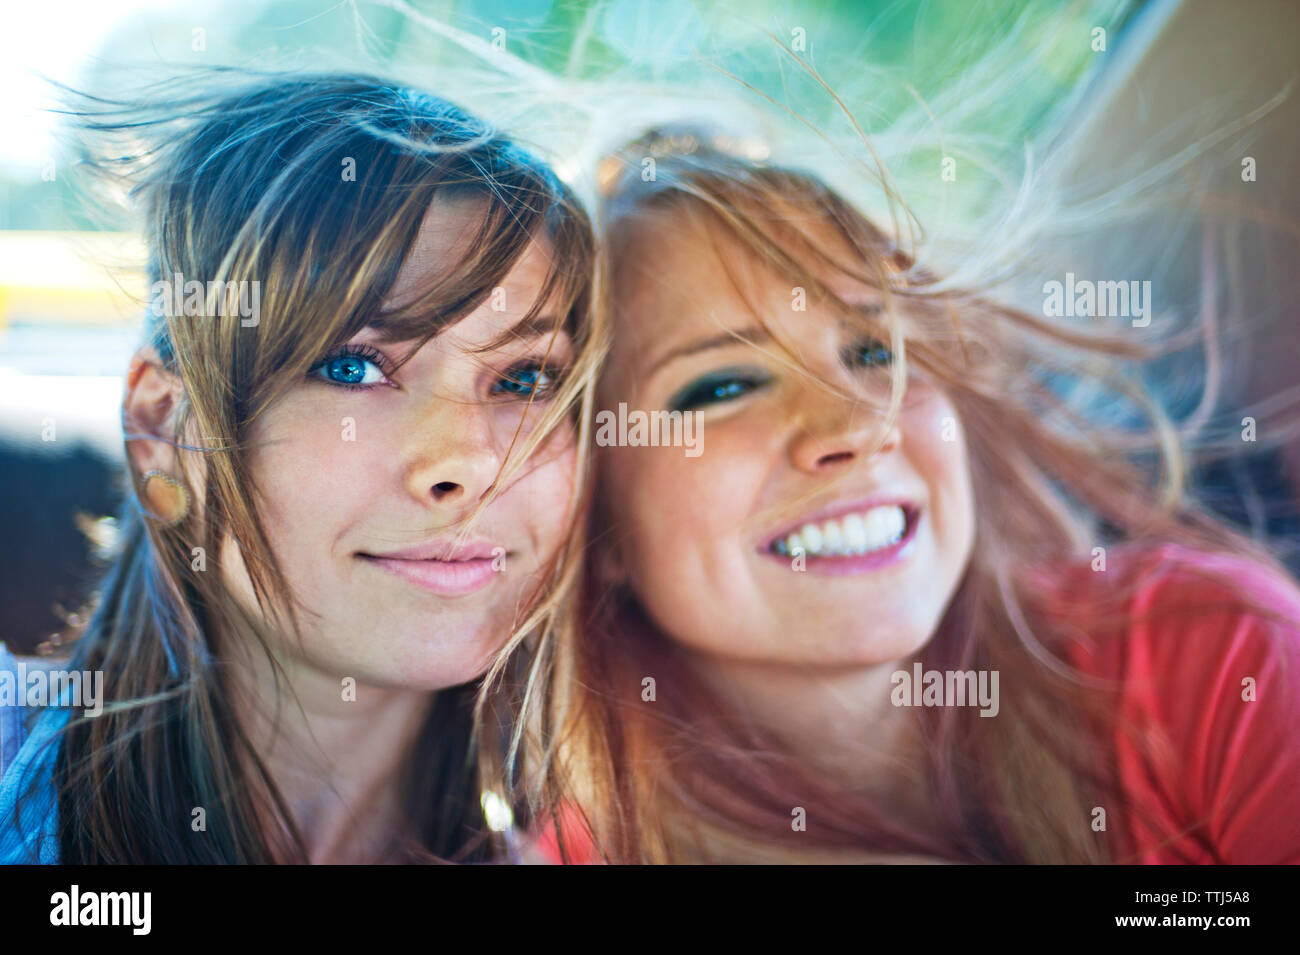 Portrait of cheerful friends Stock Photo